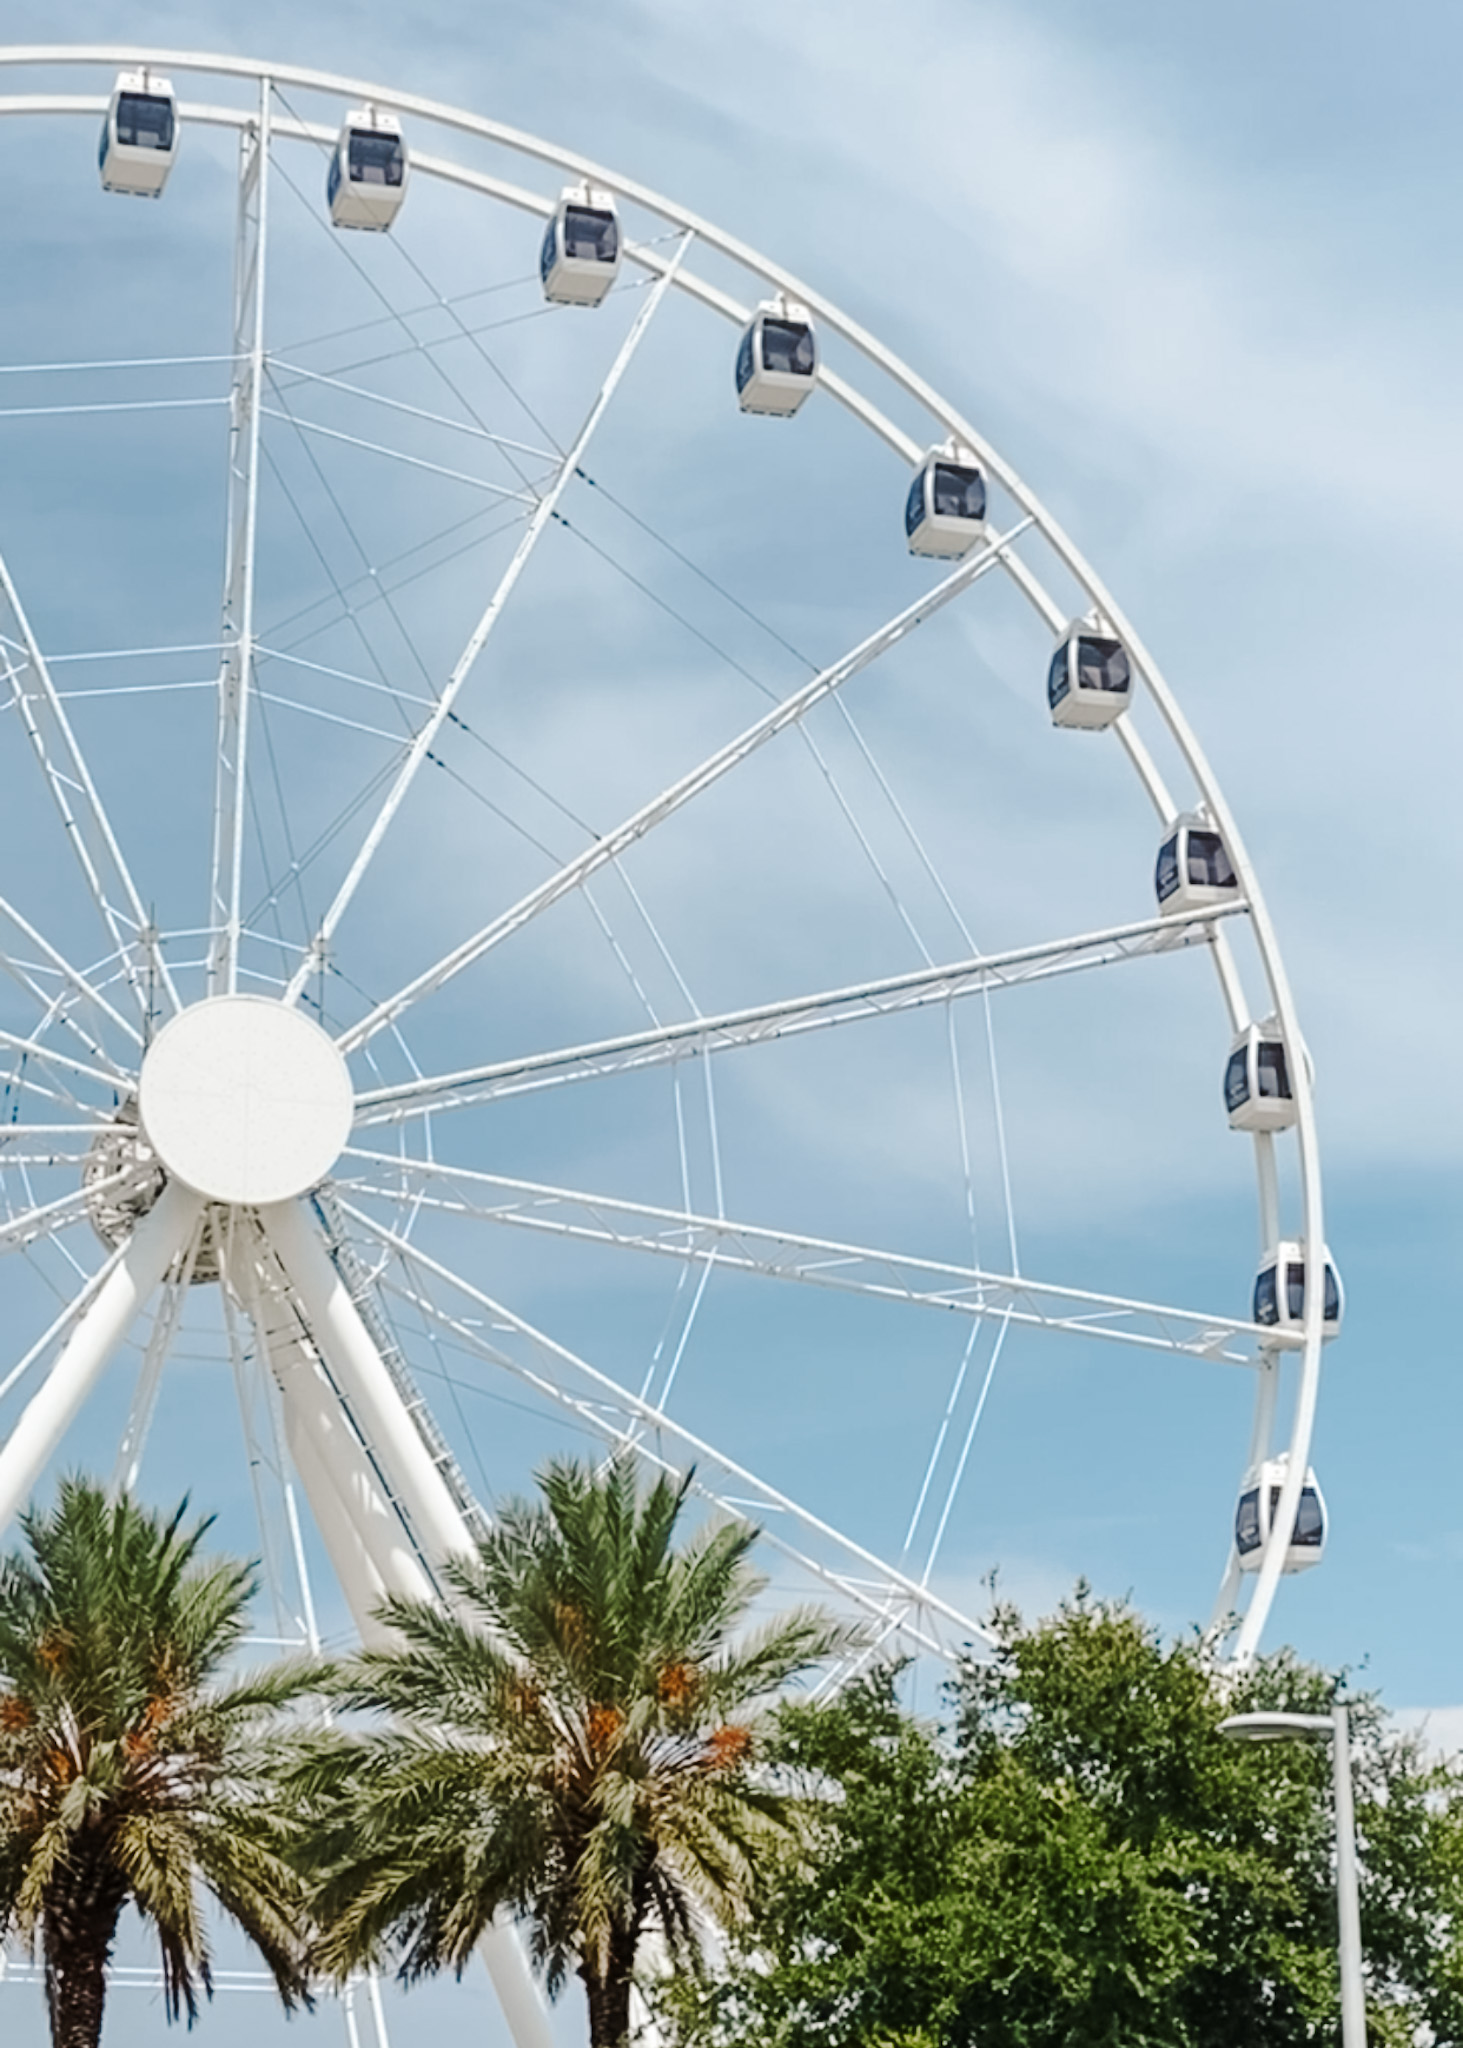 Panama City Beach Attractions by popular Memphis travel blog, Lone Star Looking Glass: image of a white Ferris wheel.